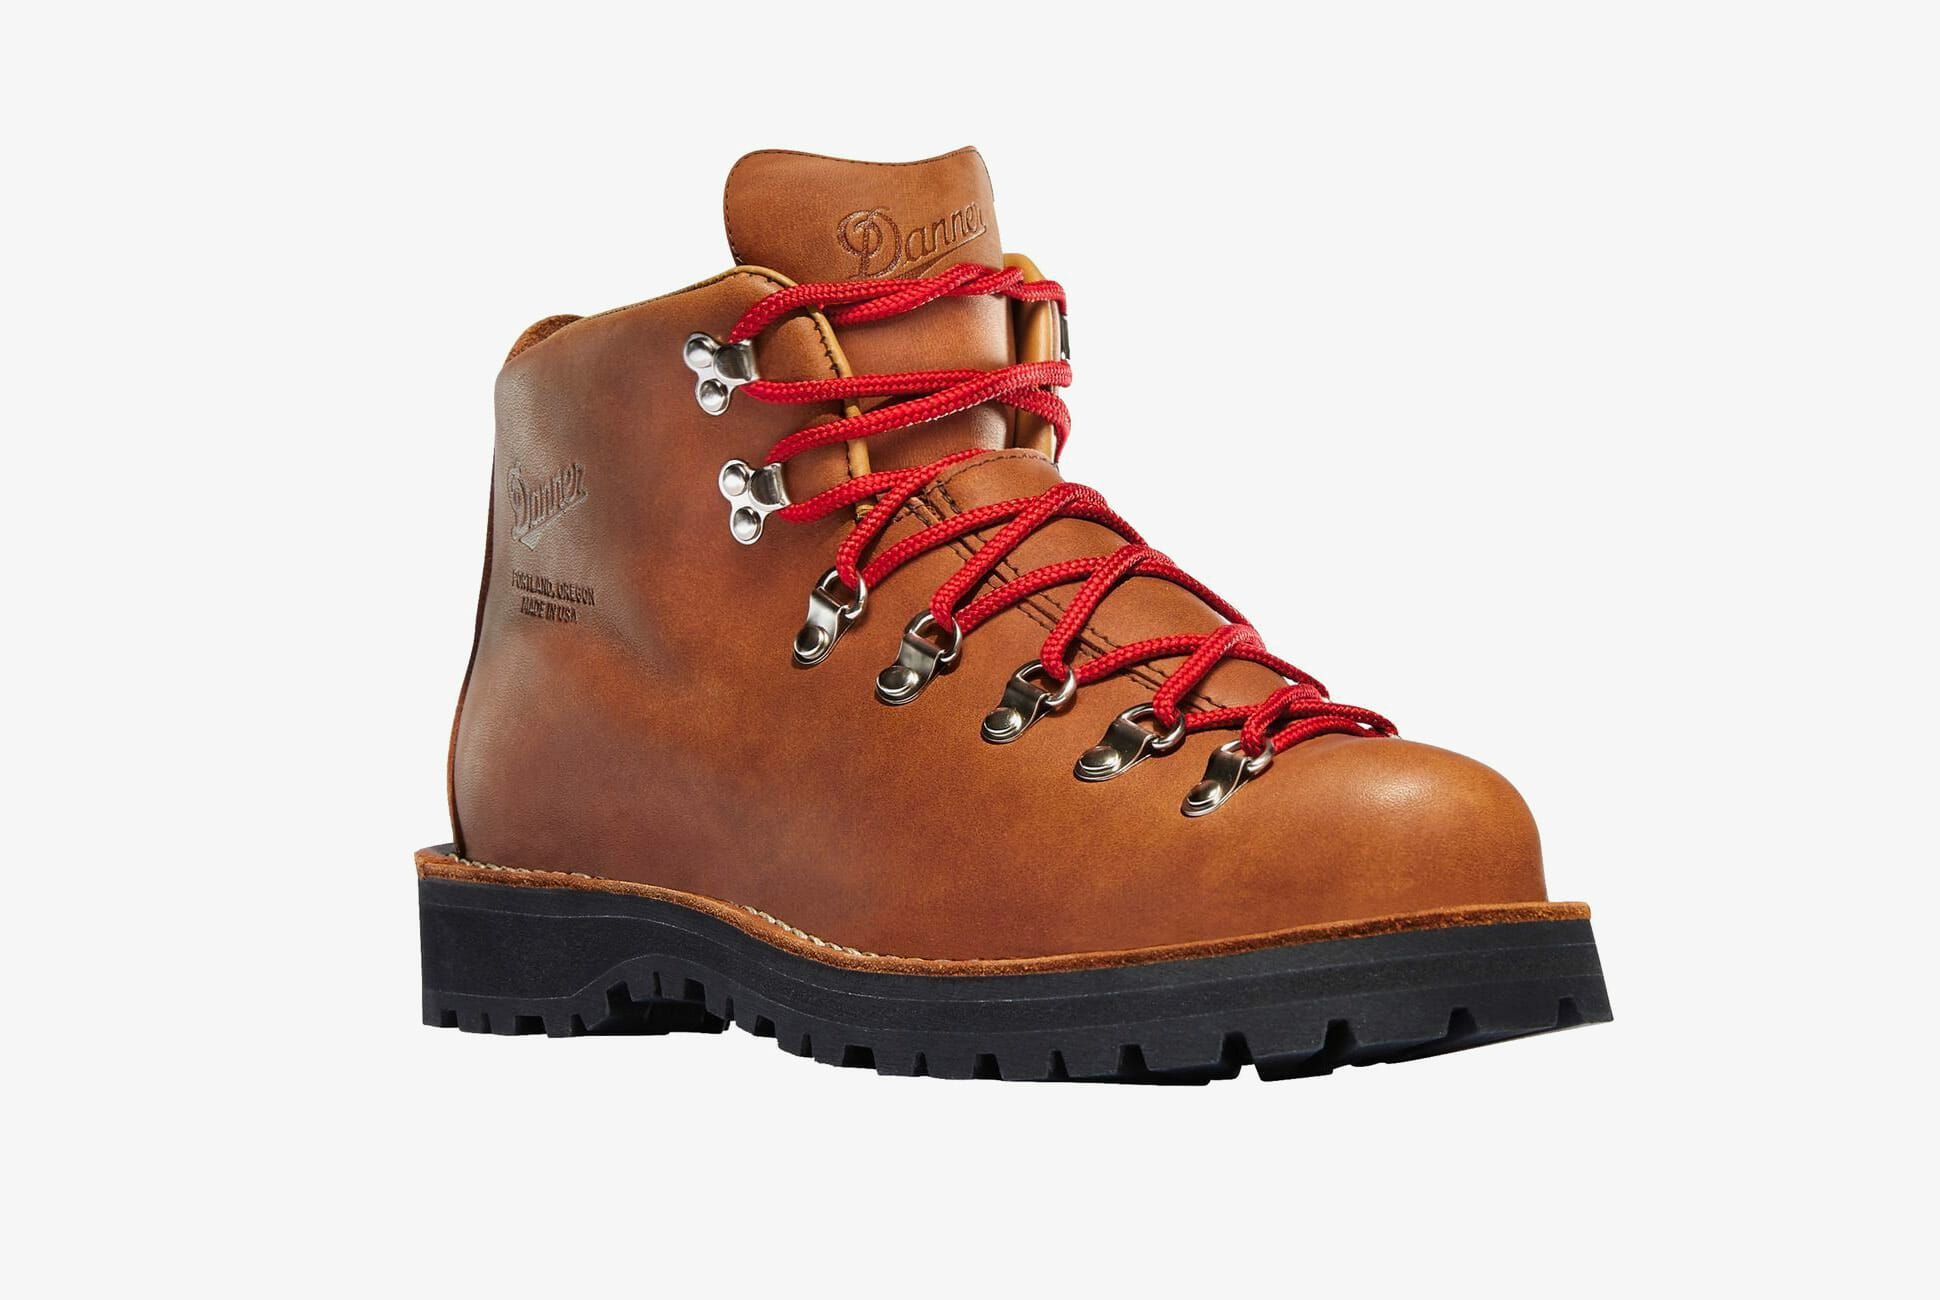 One of the Most Iconic Hiking Boots Is 